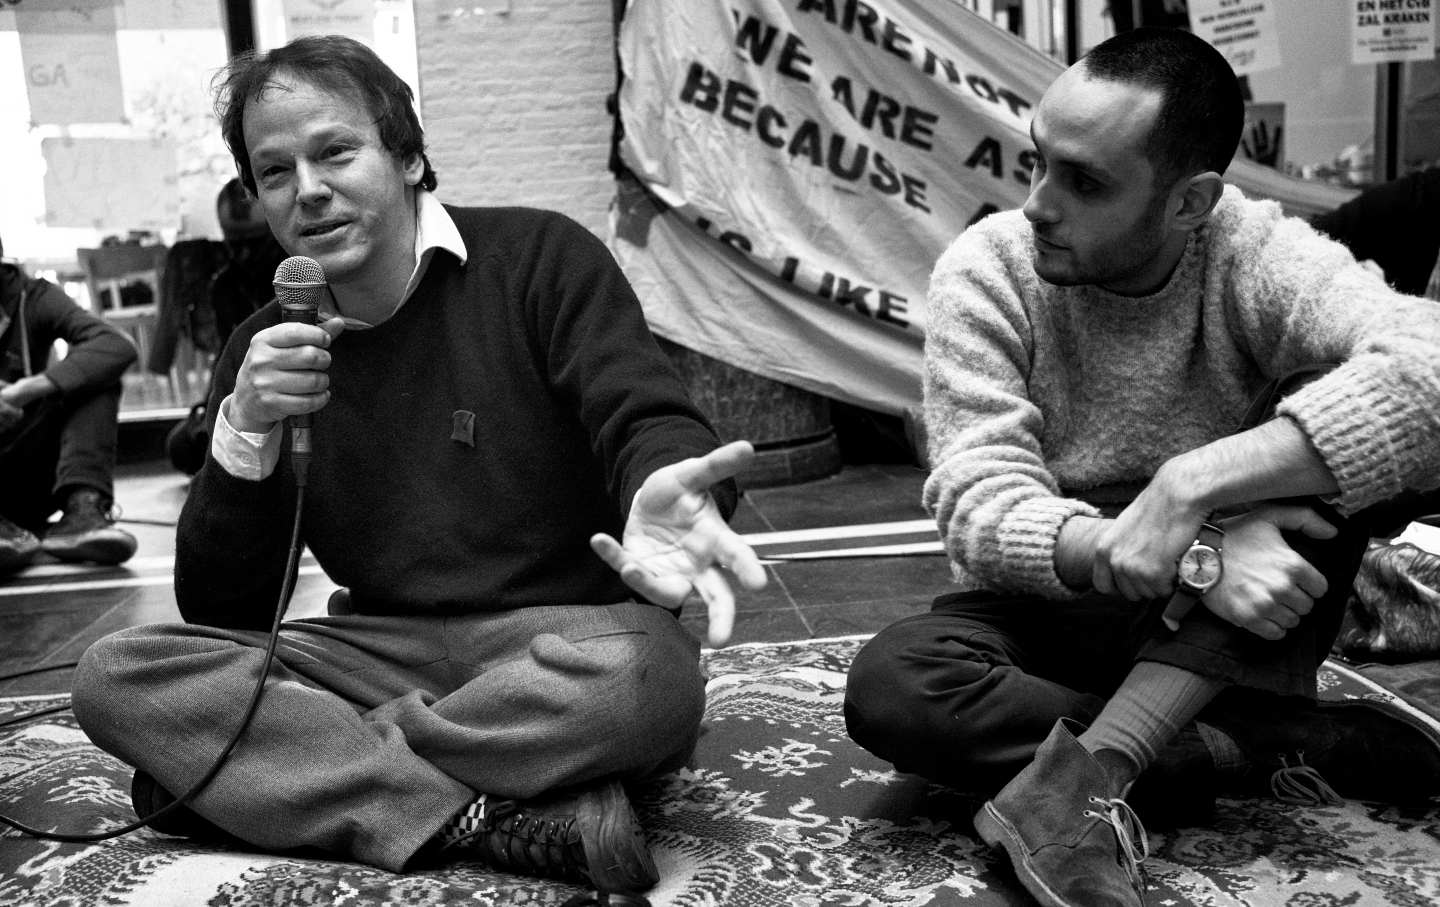 David Graeber holds a microphone and speaks at an occupation